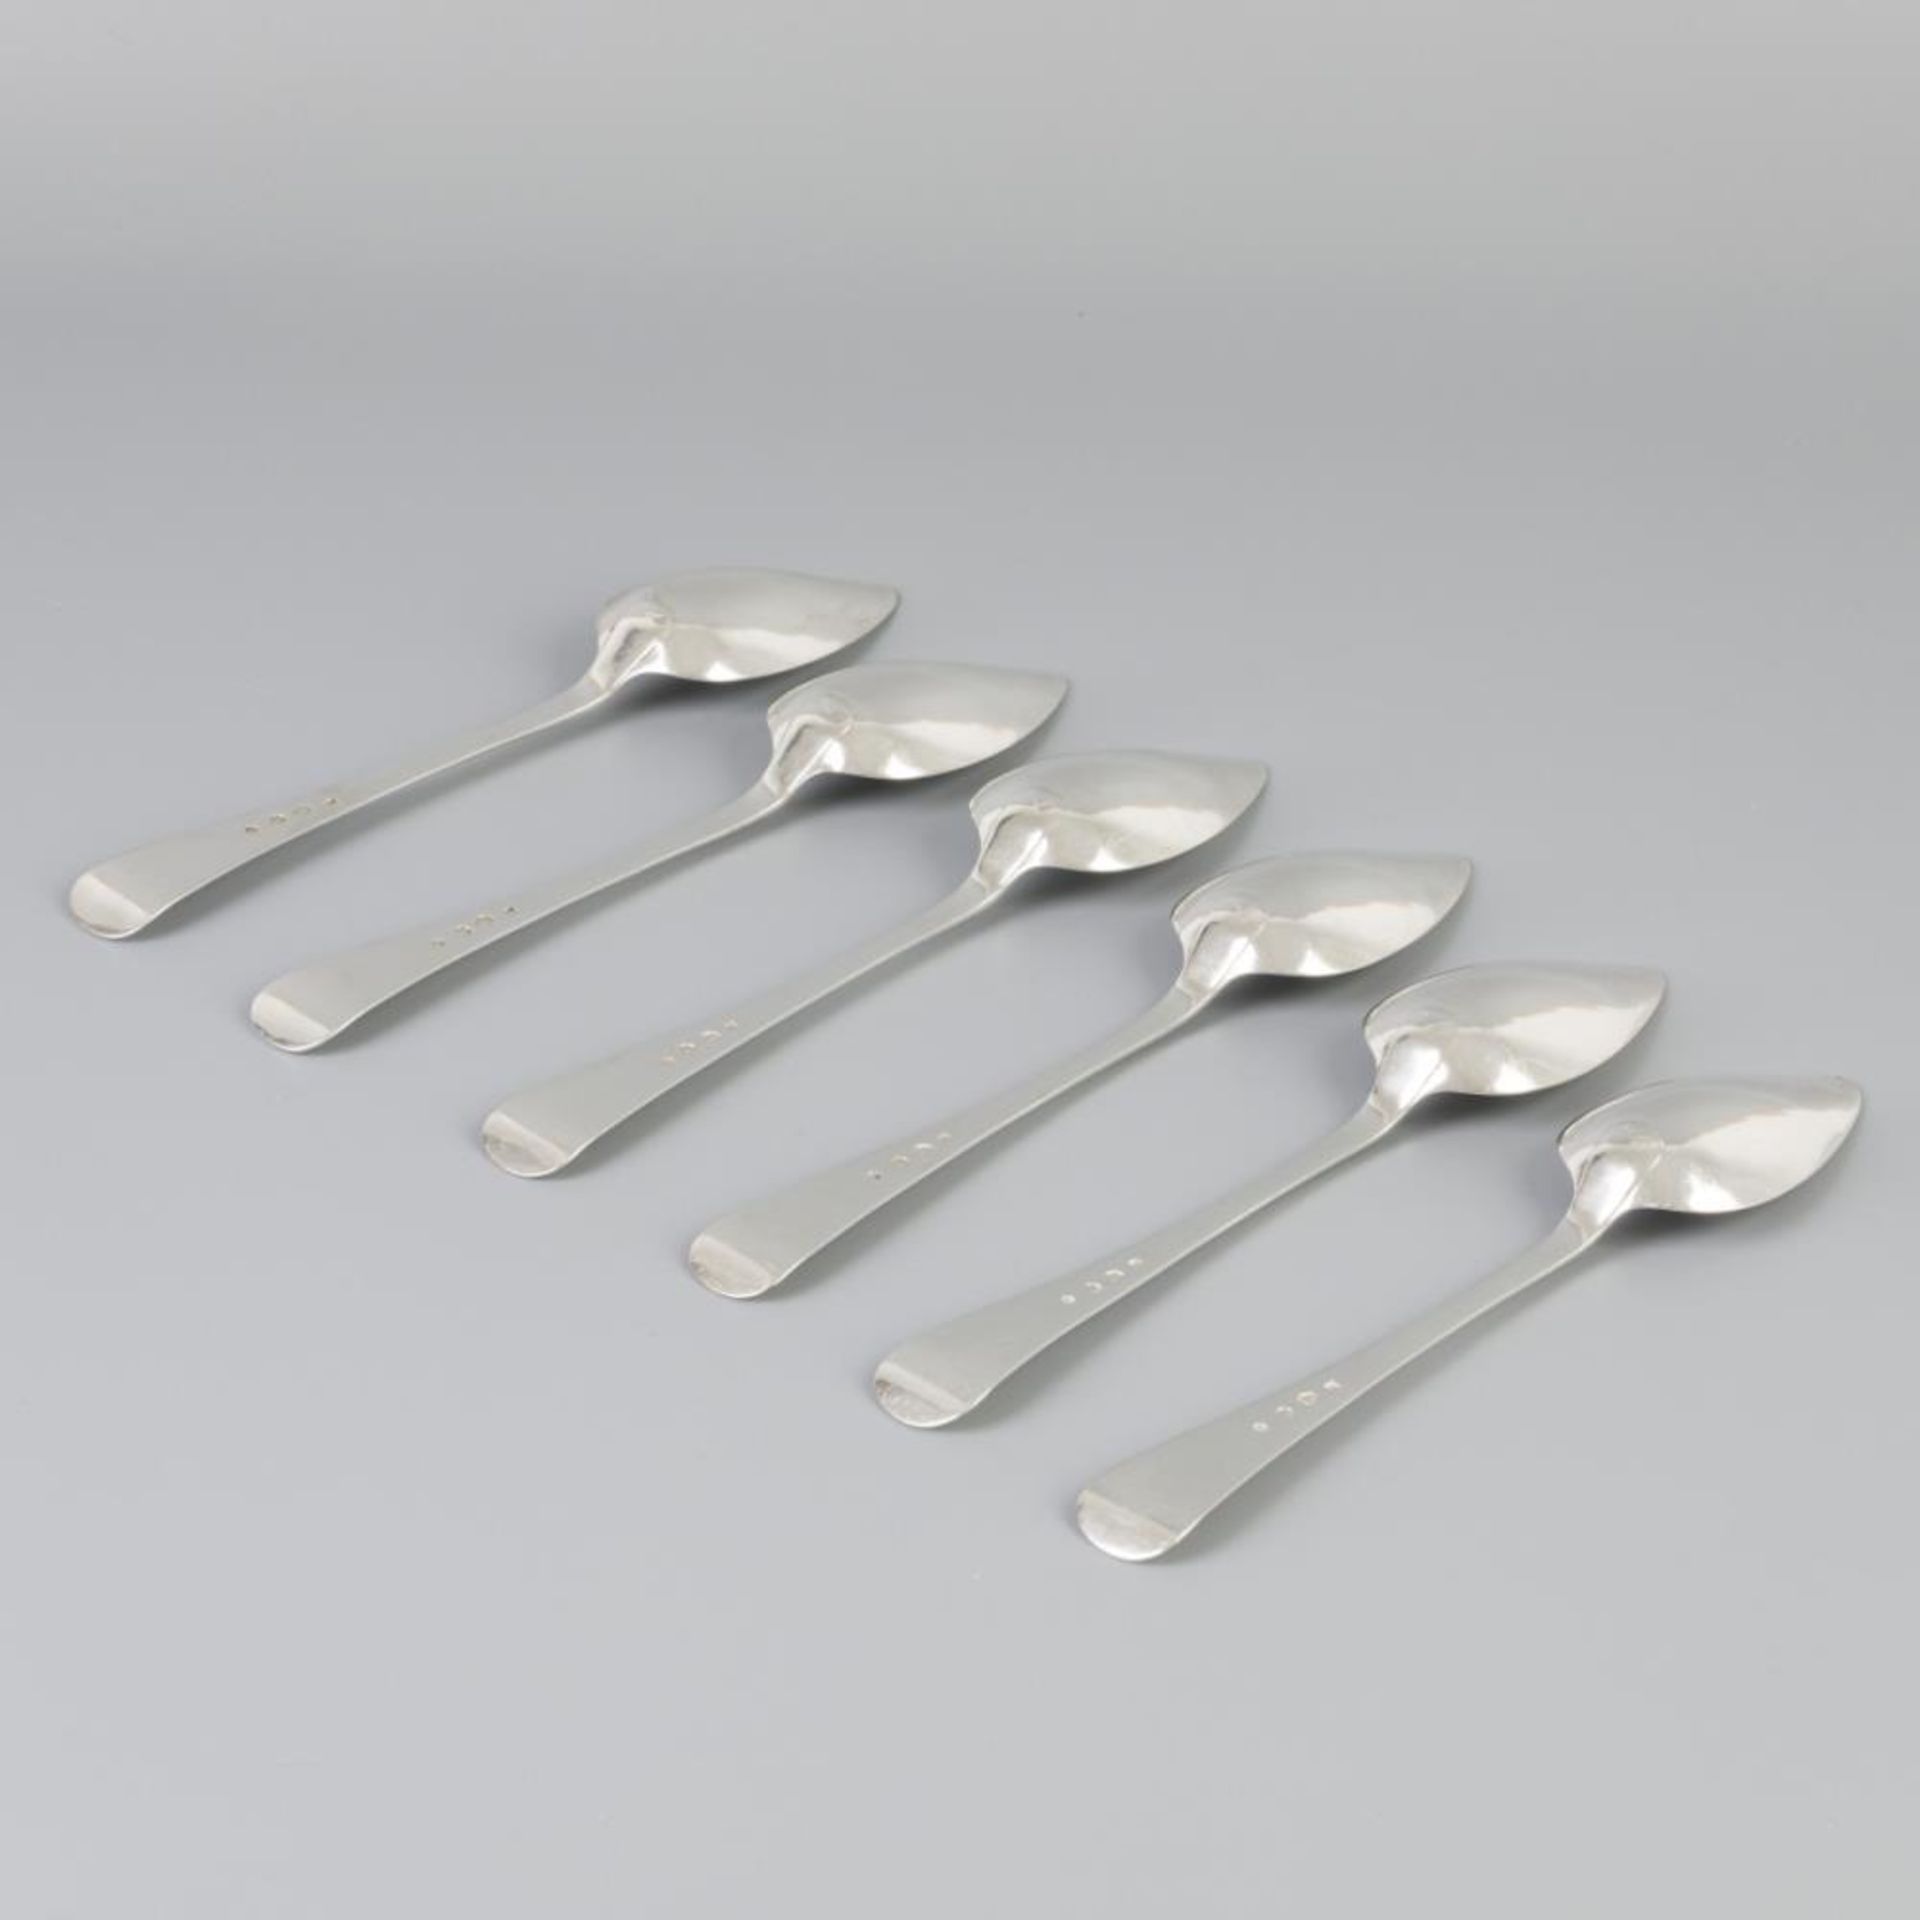 6 piece set dinner spoons "Haags Lofje" silver. - Image 3 of 6